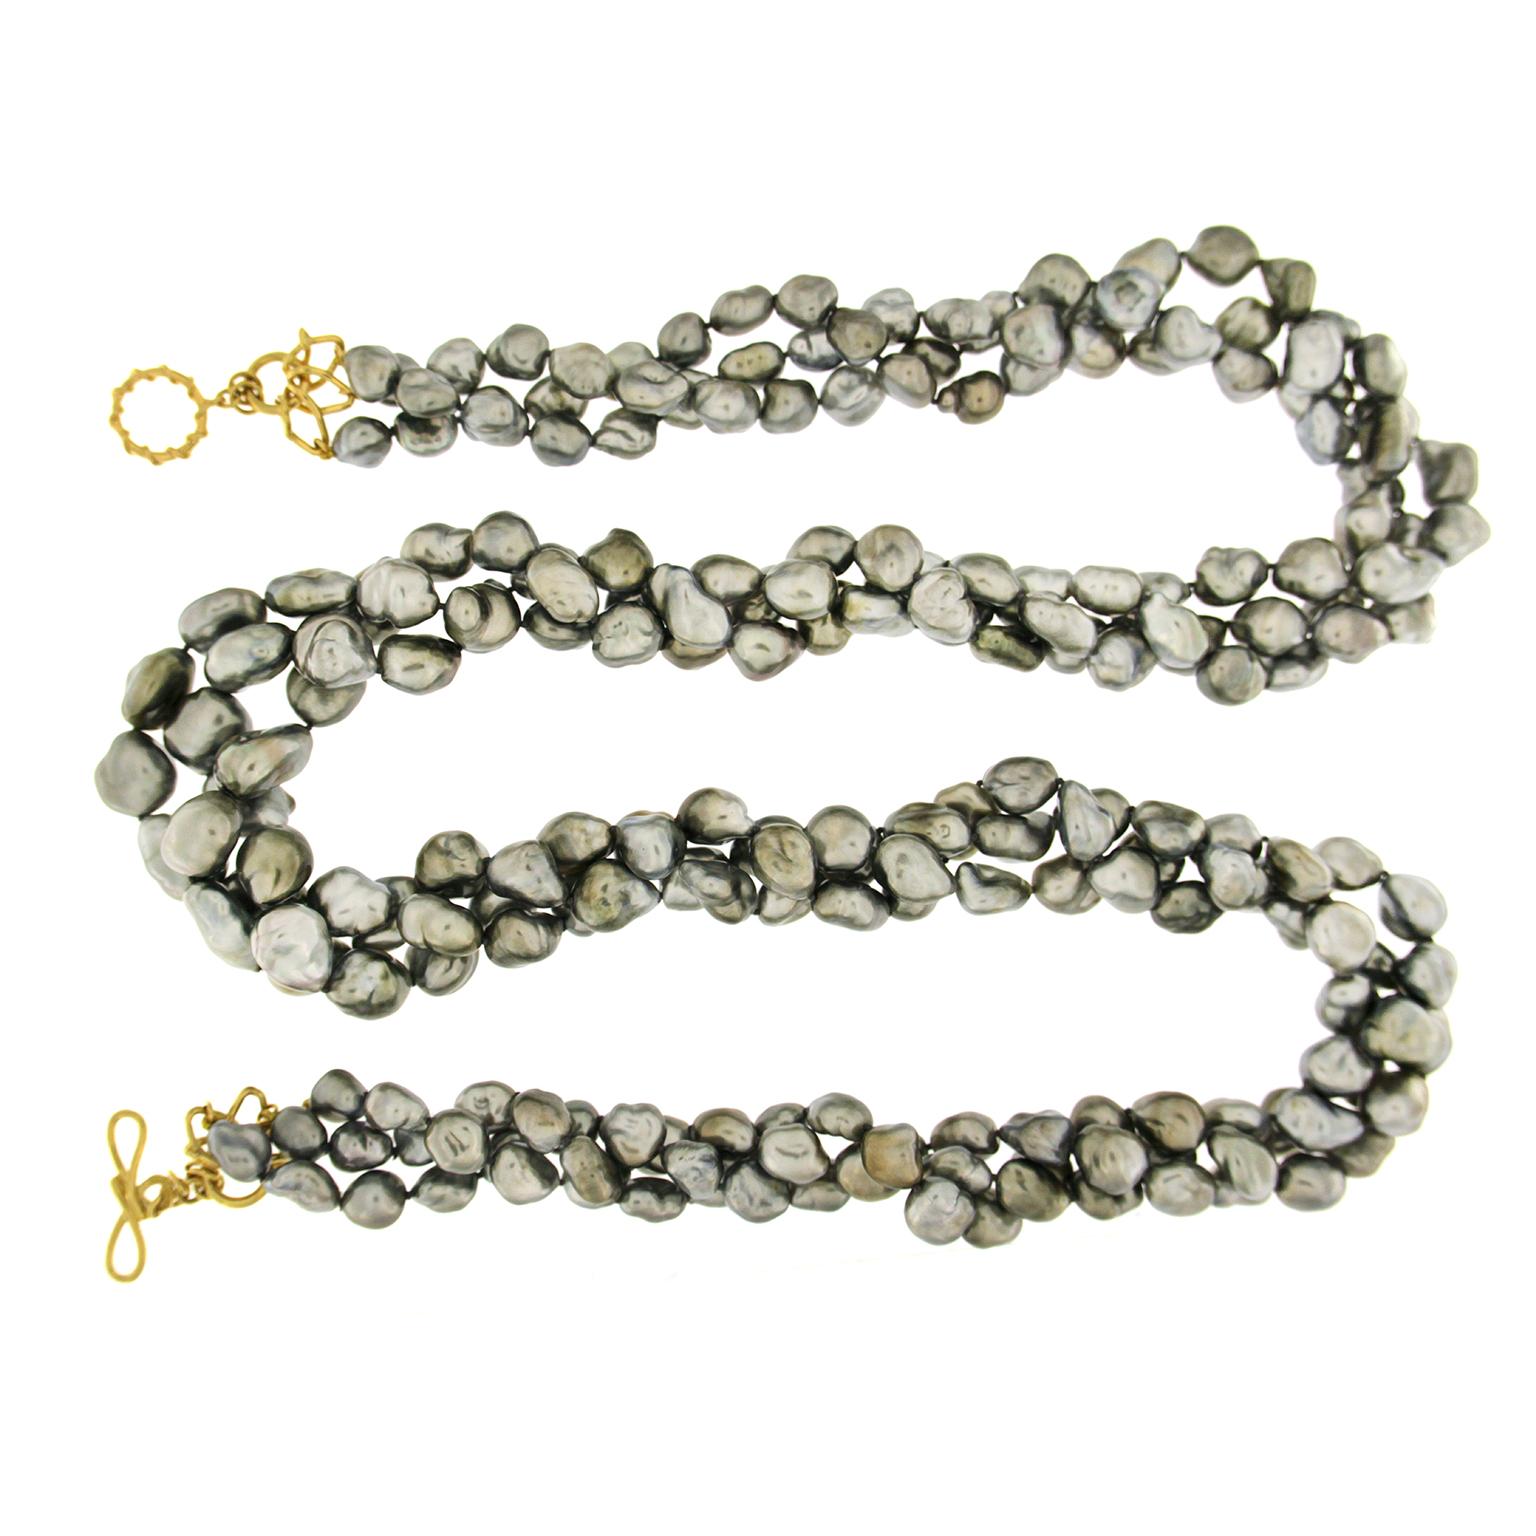 Valentin Magro Keshi Pearl Three-Strand Necklace is a study in shape. The jewel of choice is grey keshi pearls. These gems boast irregular baroque shapes with pure nacre bodies, giving them unique luster which gleams every which way. The pearls are